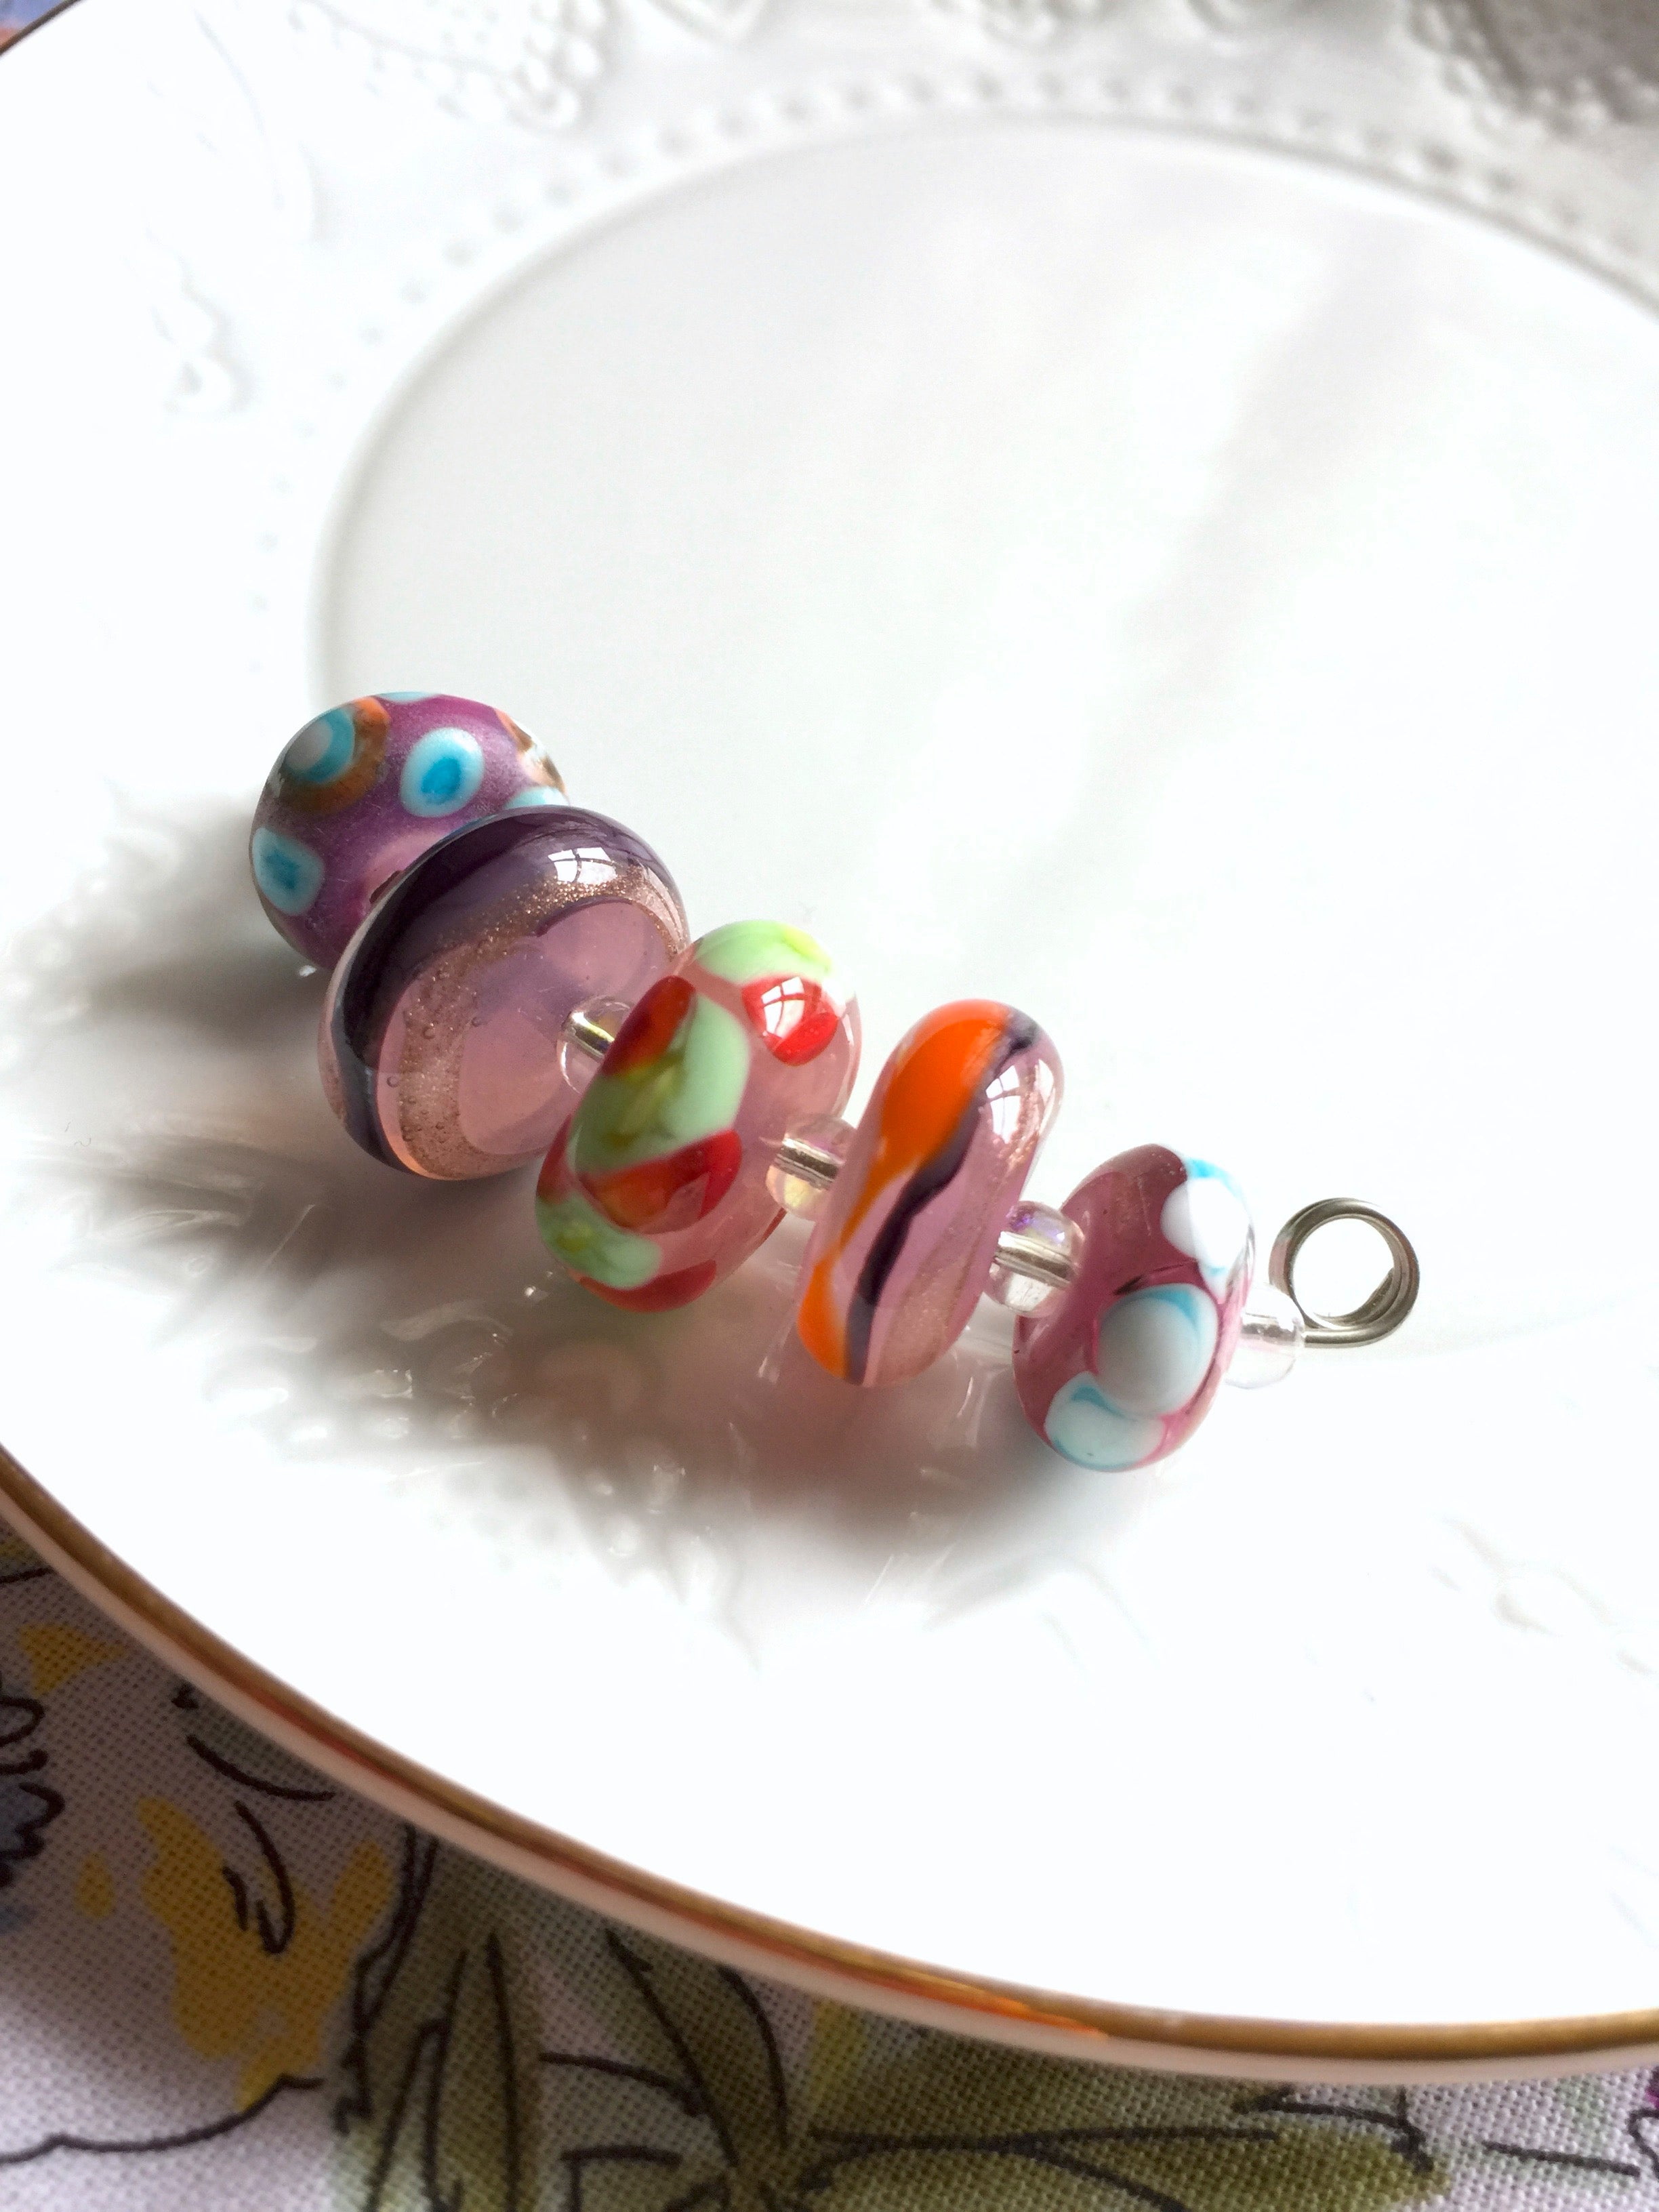 Set of 5 Colorful Handcrafted Lampwork Glass Beads with Bright Swirls, Stripes, and Dots in fun summer colors.